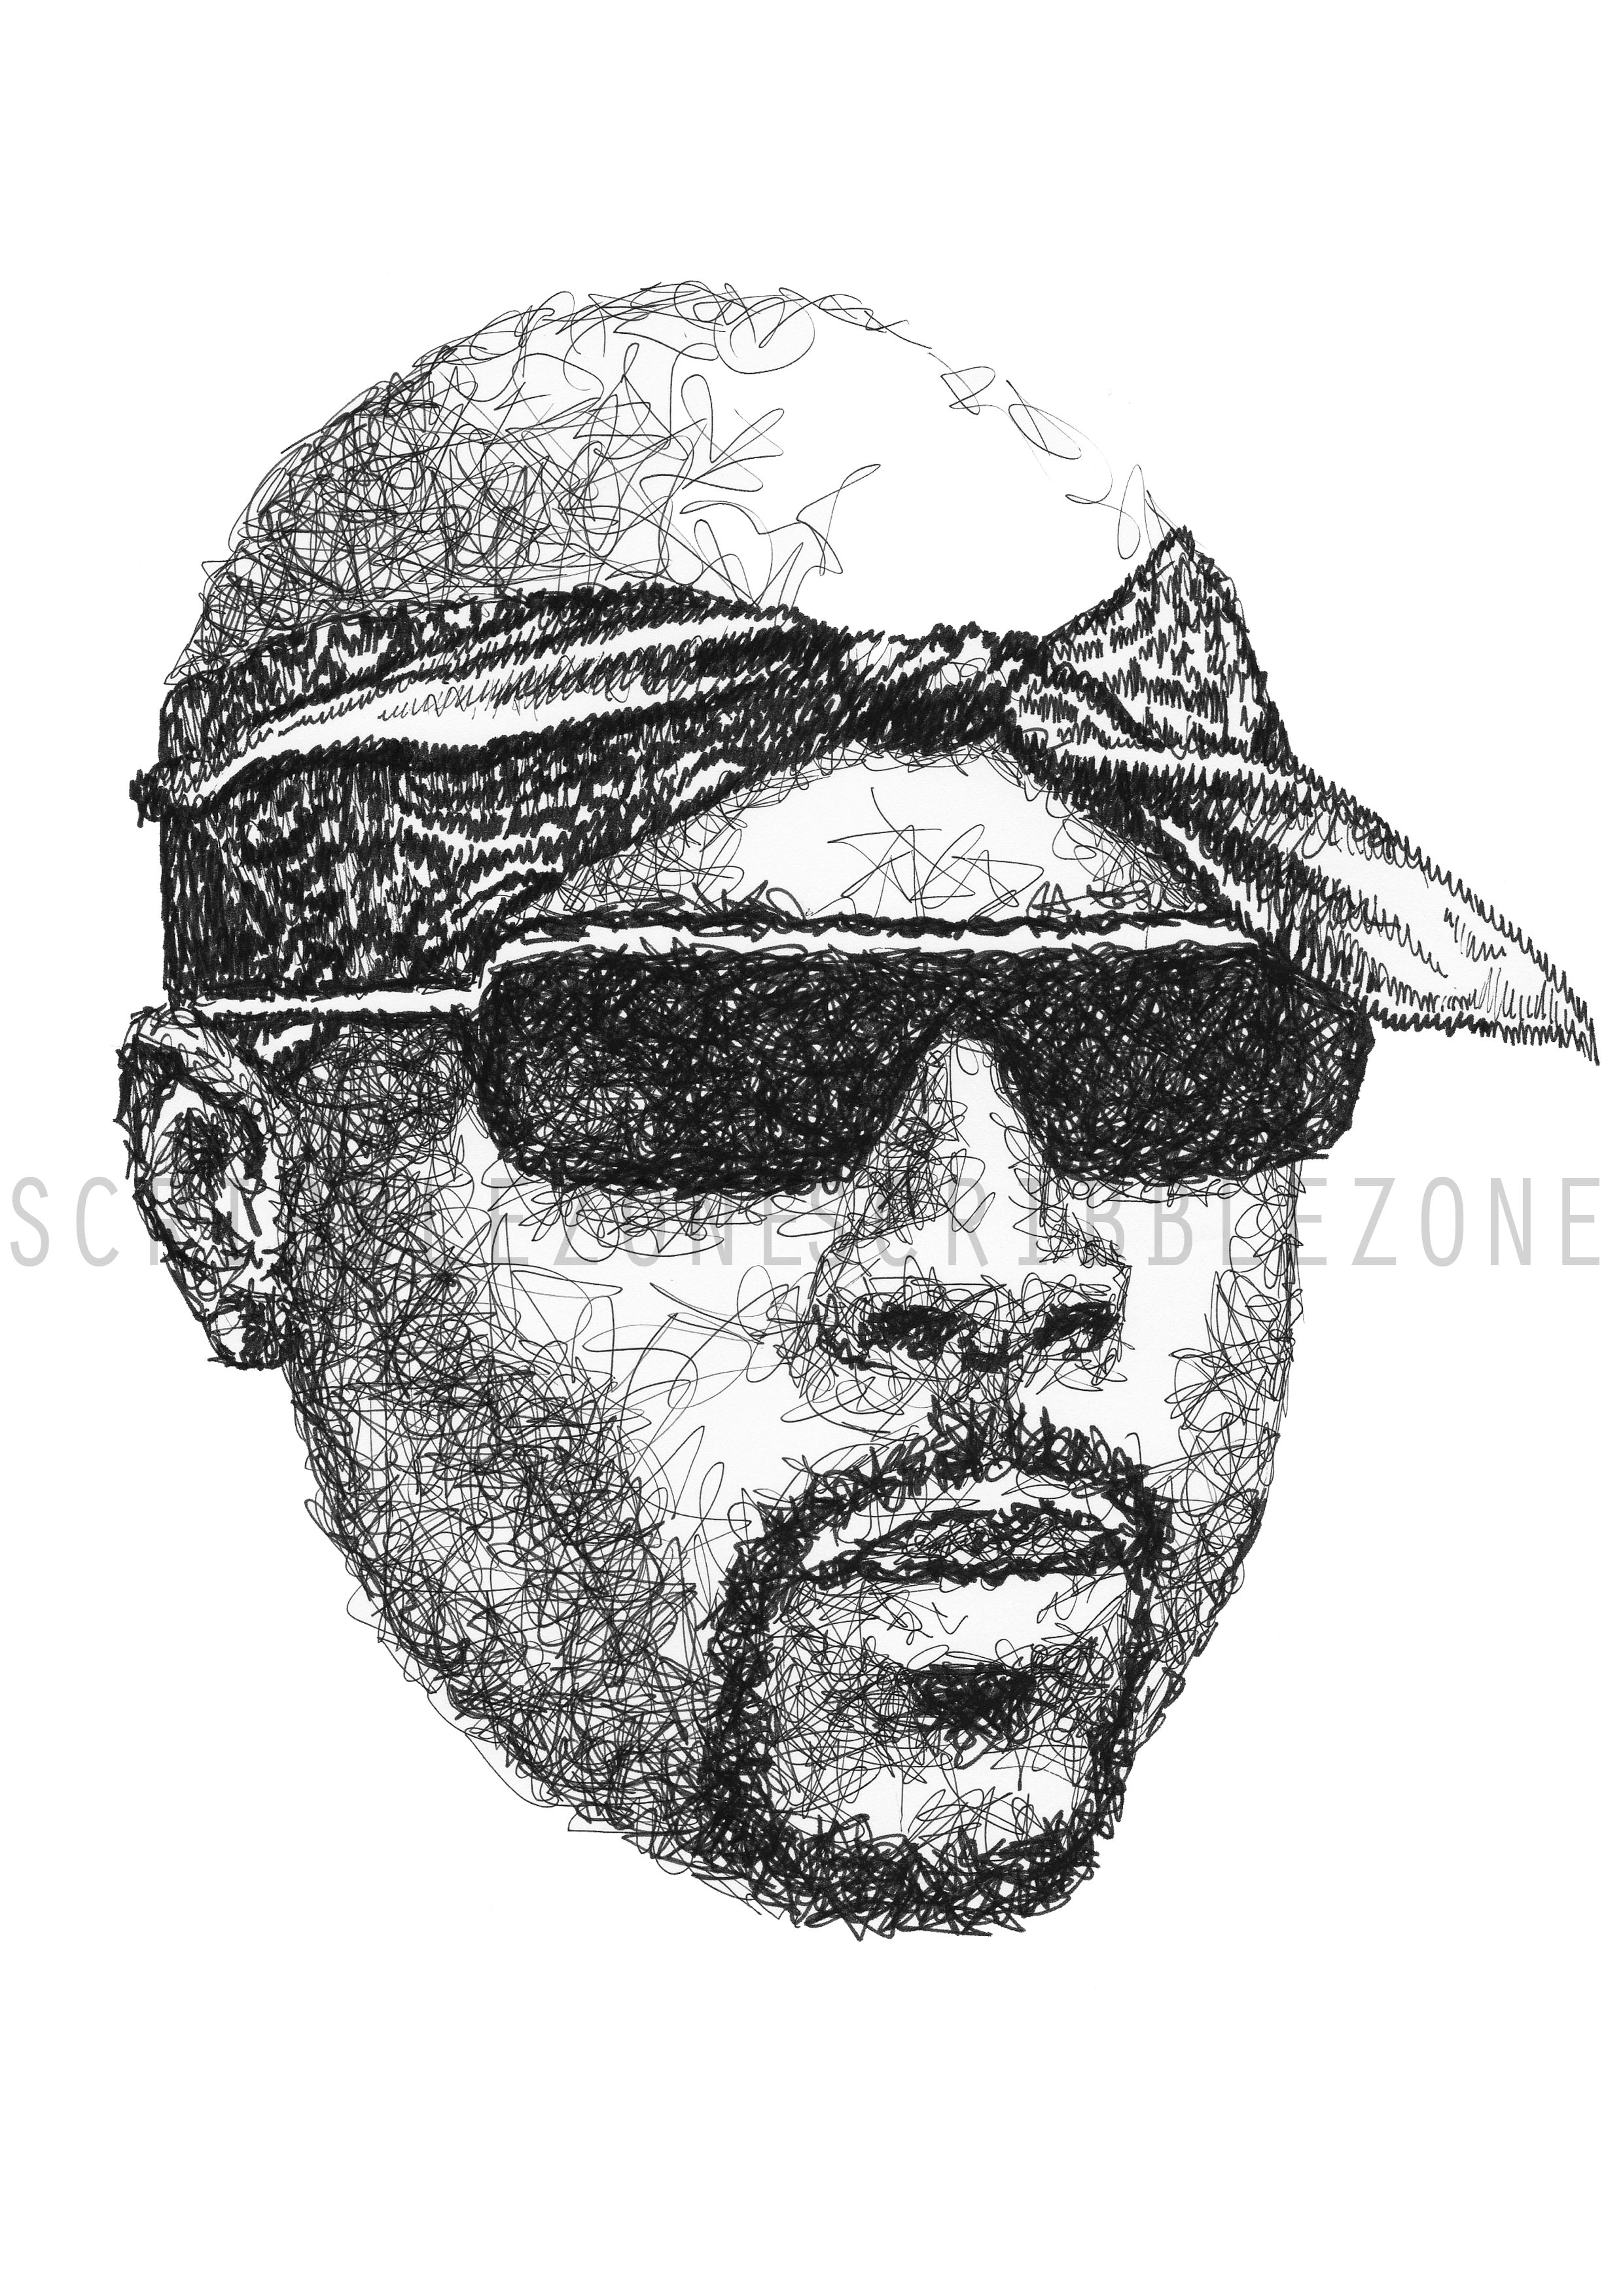 Scribbled Nate Dogg